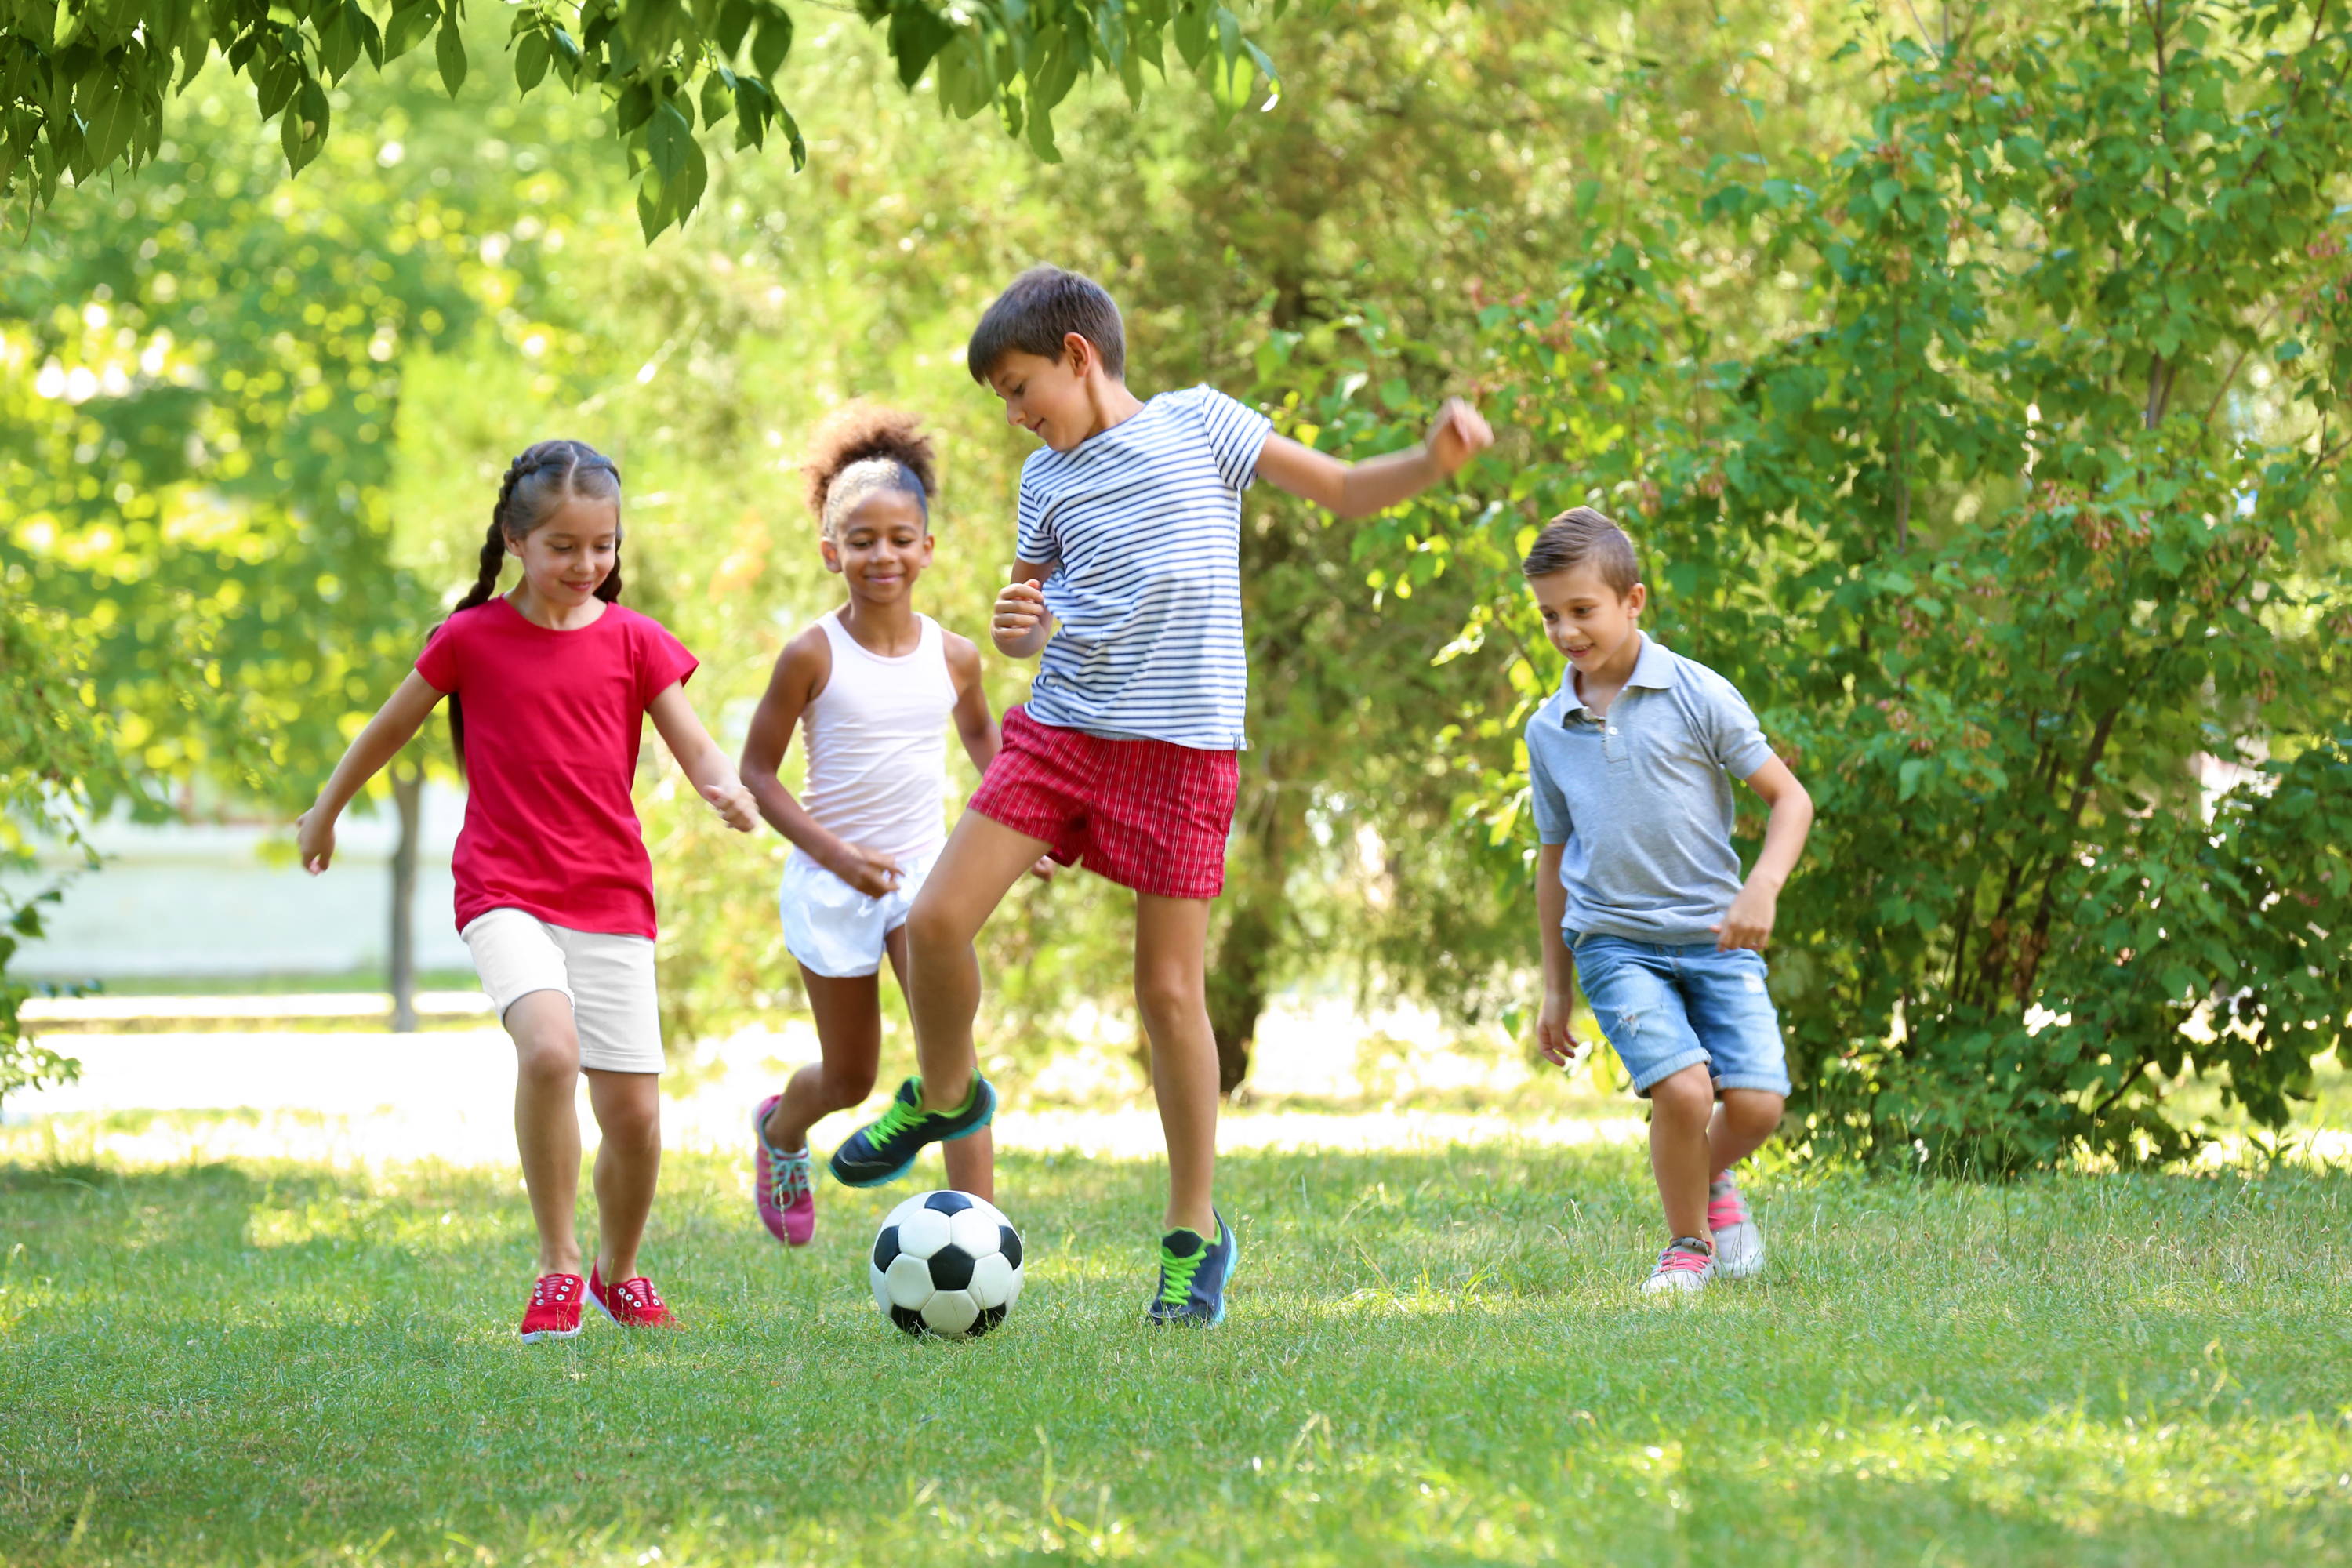 Kids playing soccer while outdoors